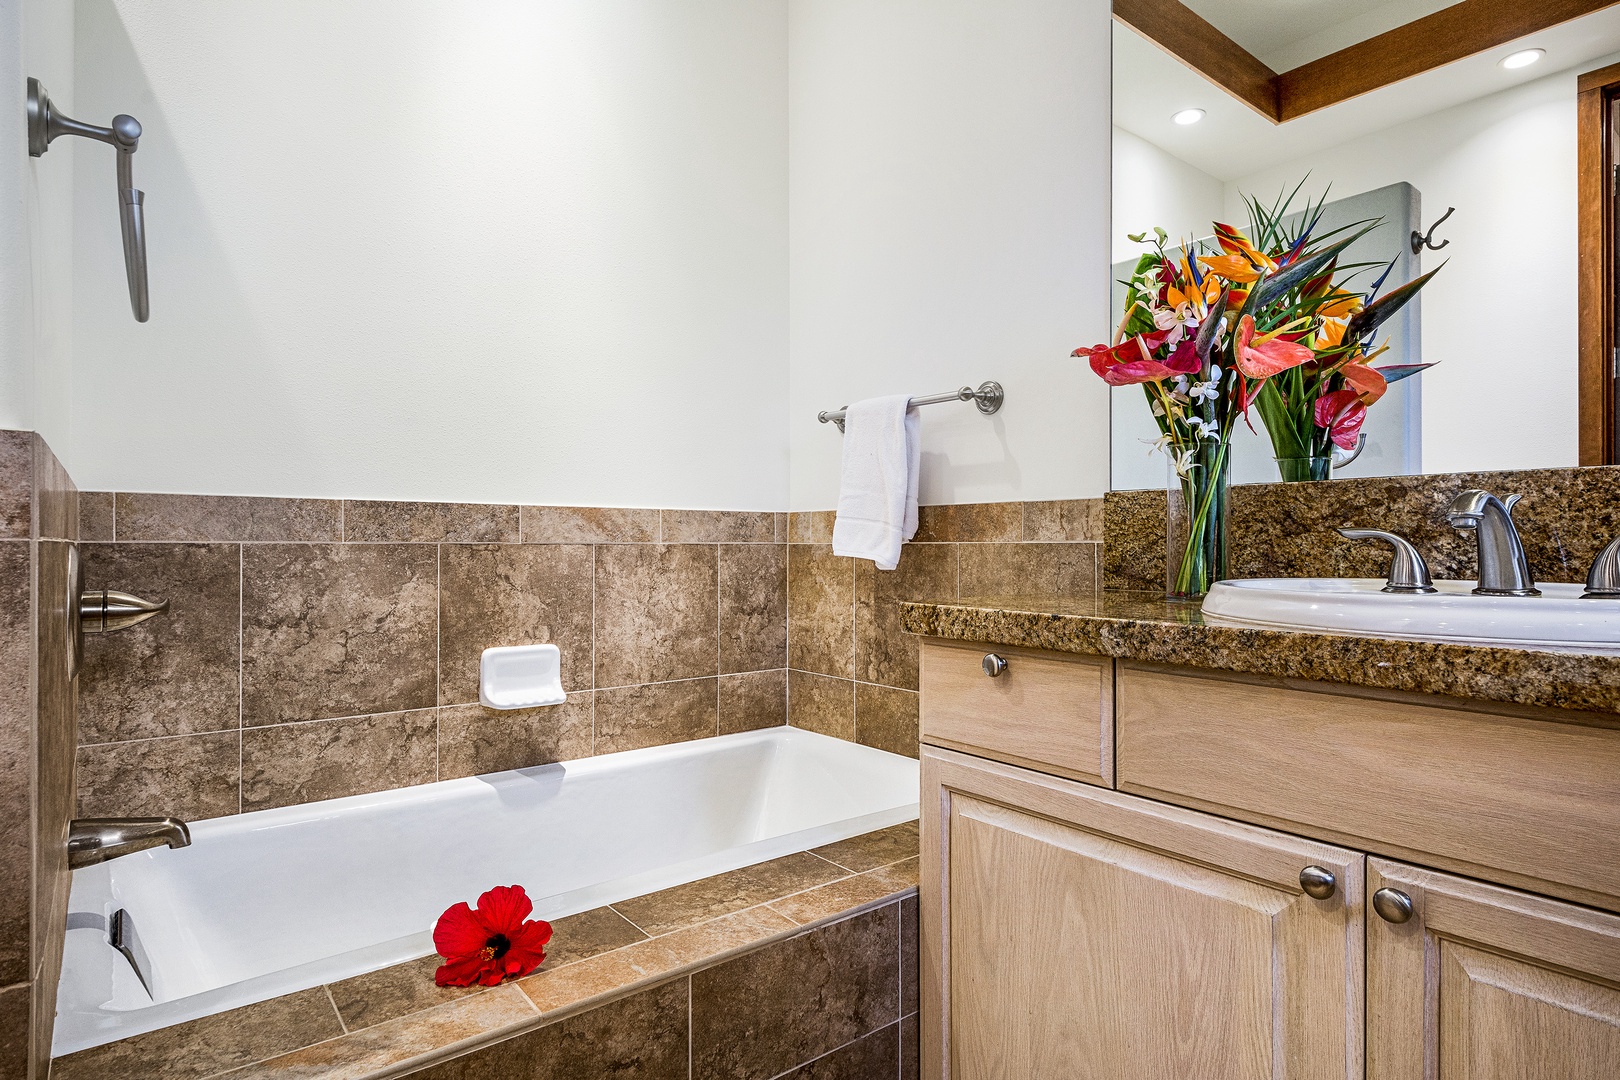 Kailua Kona Vacation Rentals, O'oma Plantation - Large soaking tub and standing shower can be found in the Primary bathroom